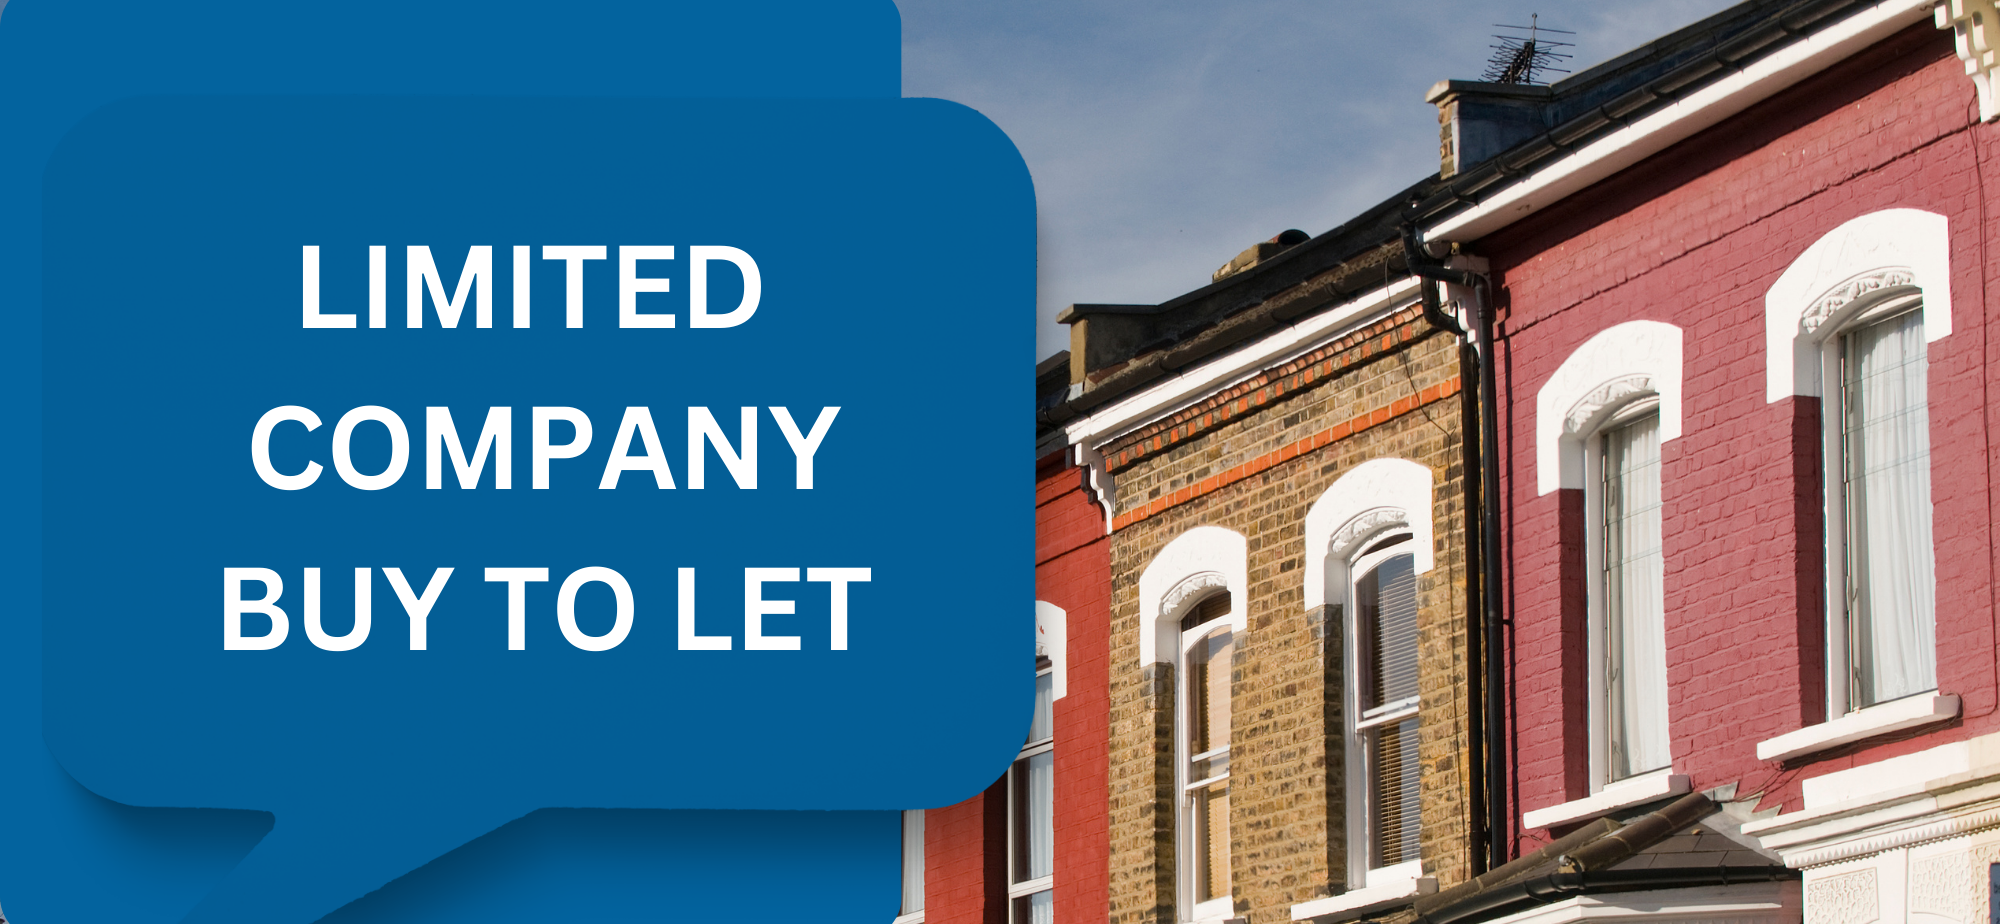 Limited Company Buy to Let